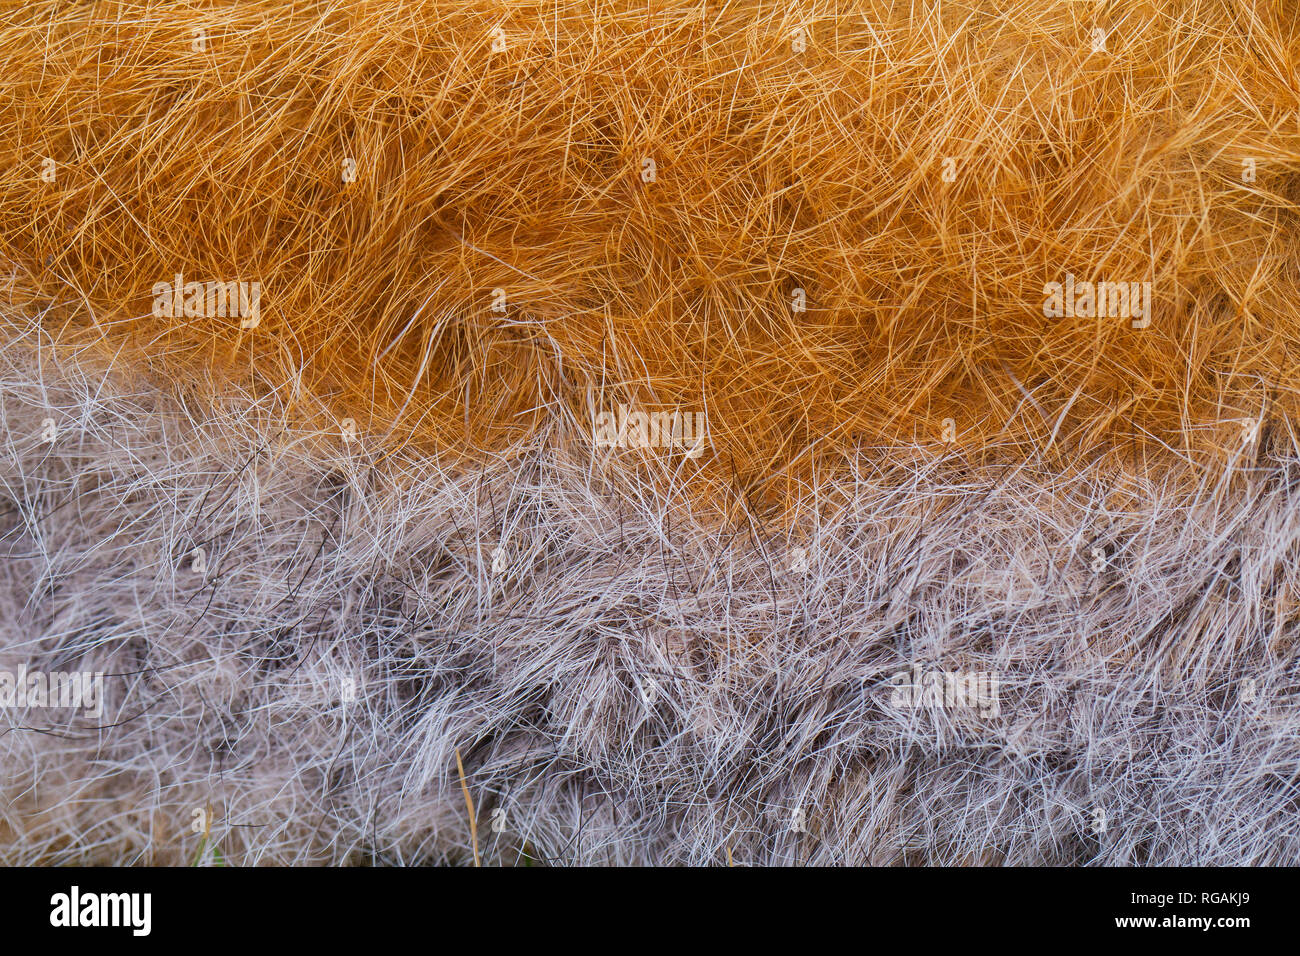 Red fox (Vulpes vulpes) close-up of the white and orange guard hairs in dense coat / fur Stock Photo